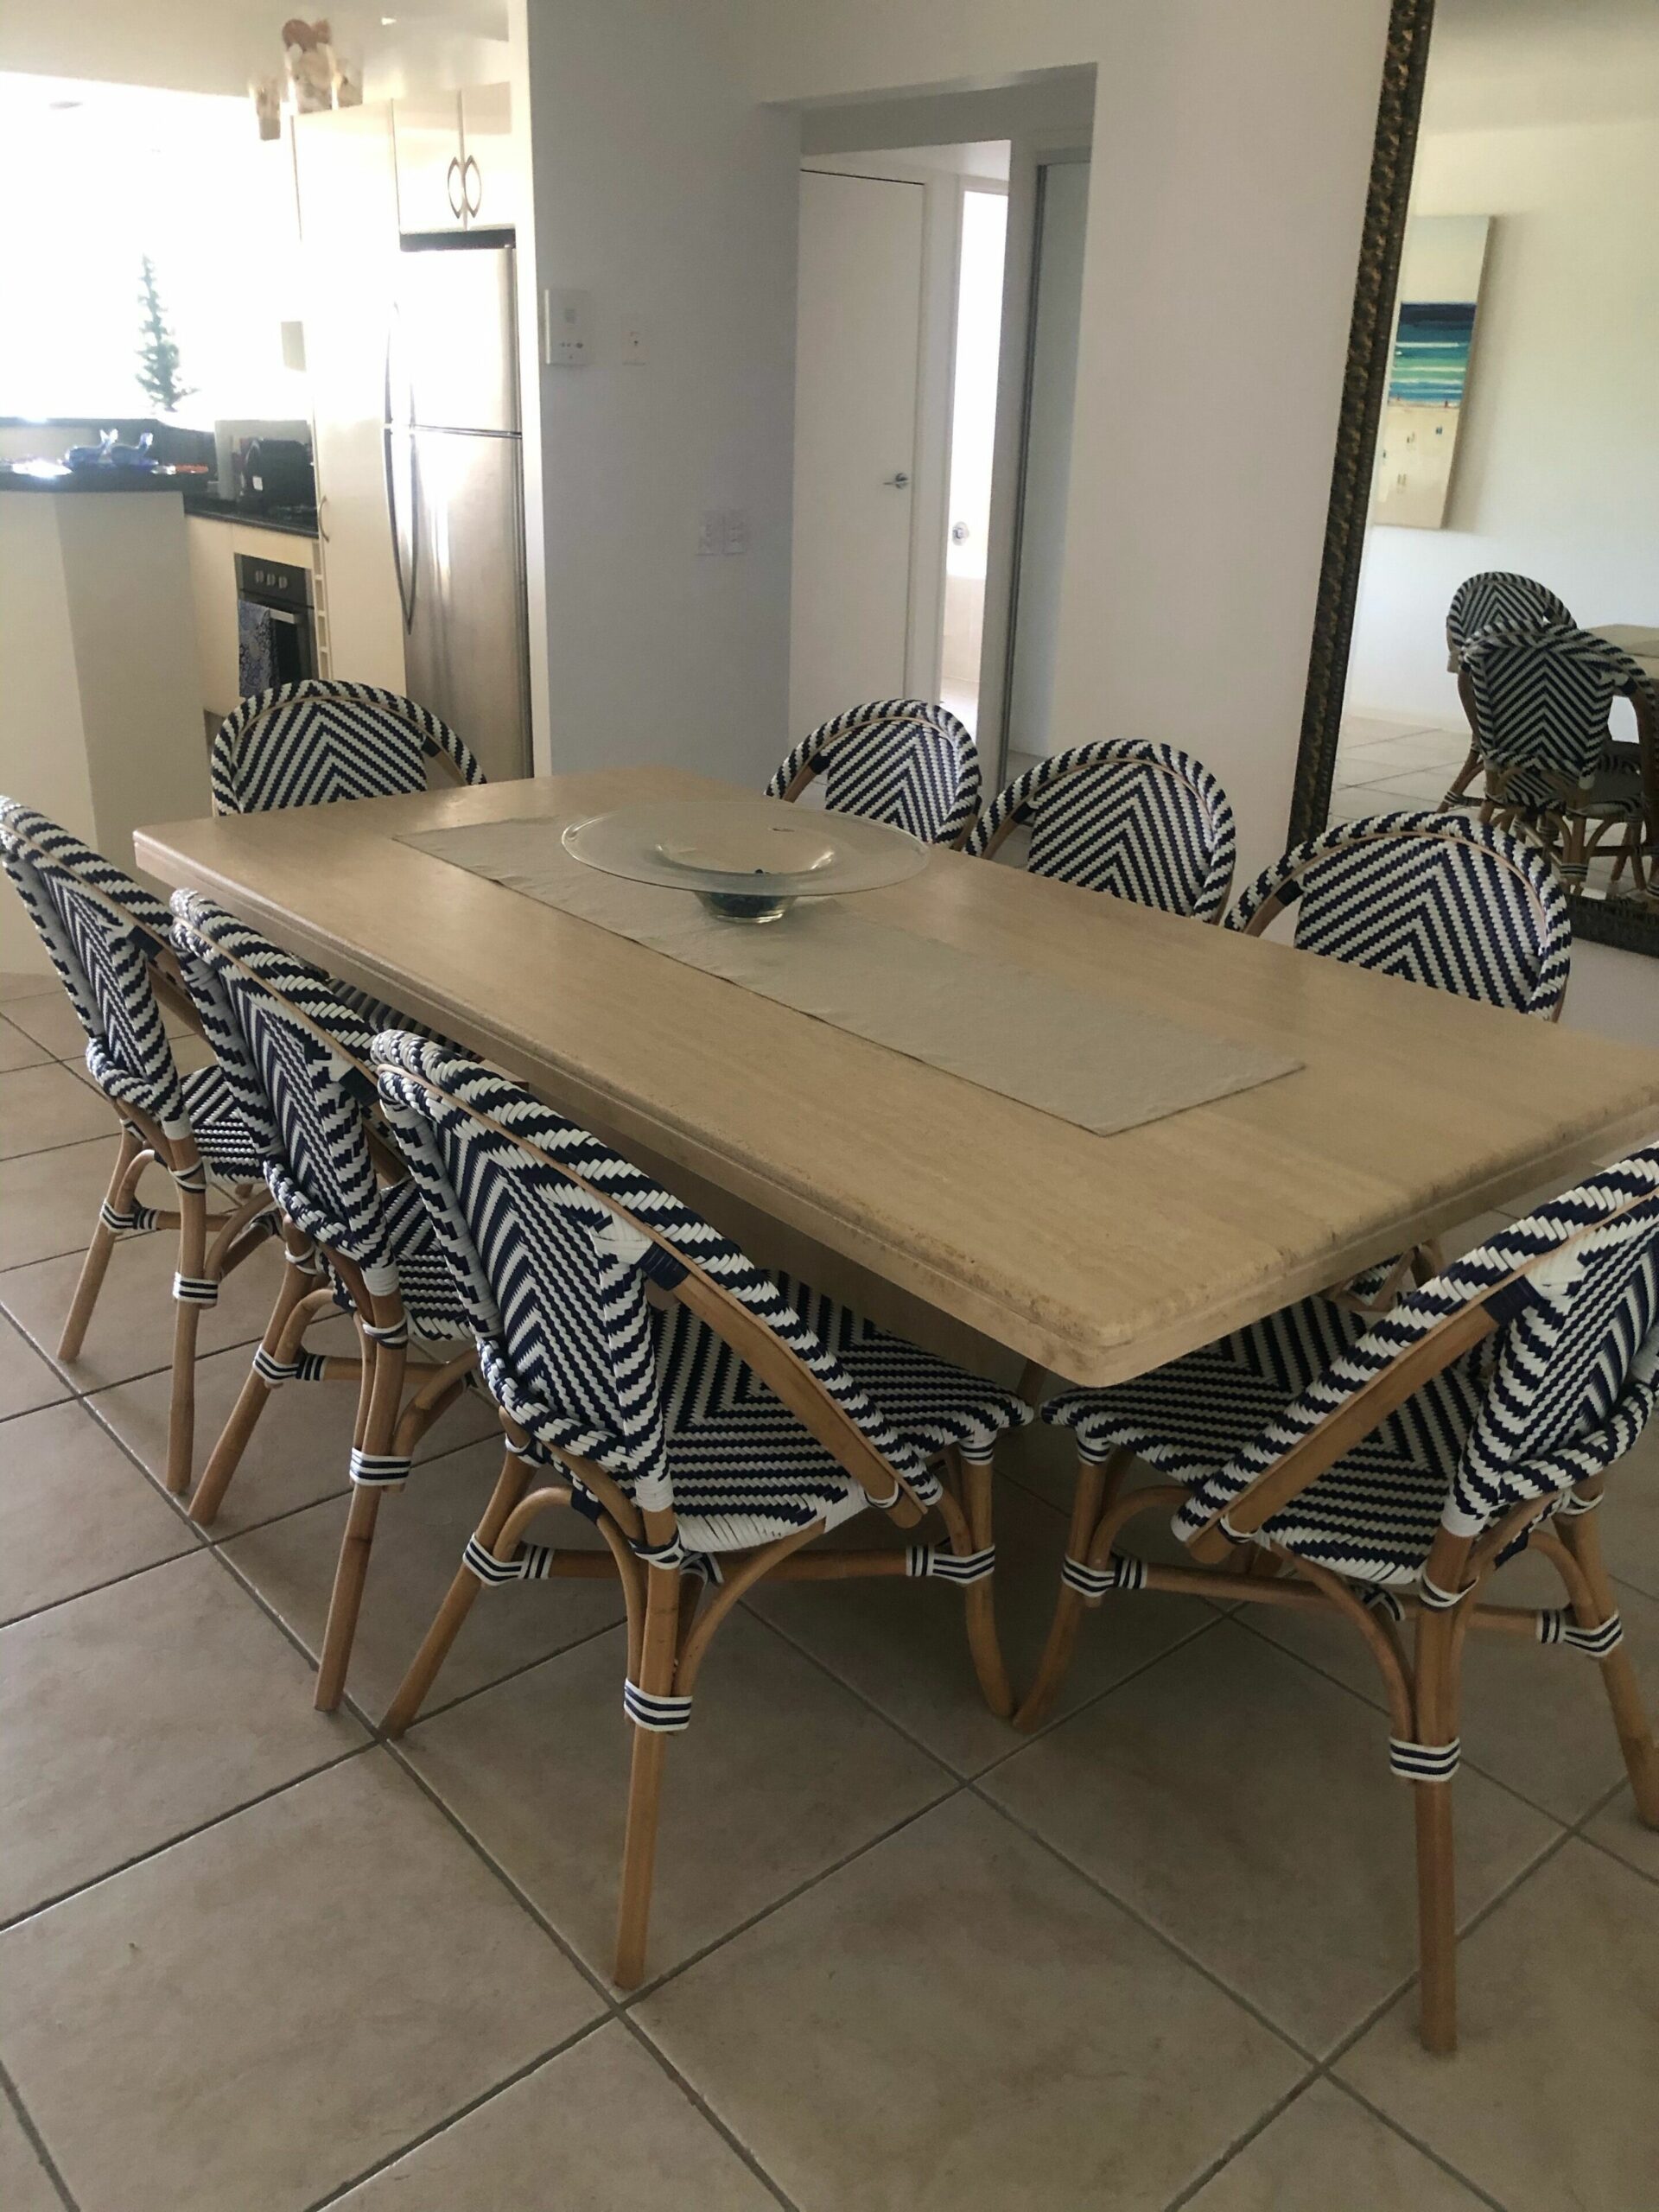 Beach Front Luxury Apartment at Cotton Tree, Maroochydore